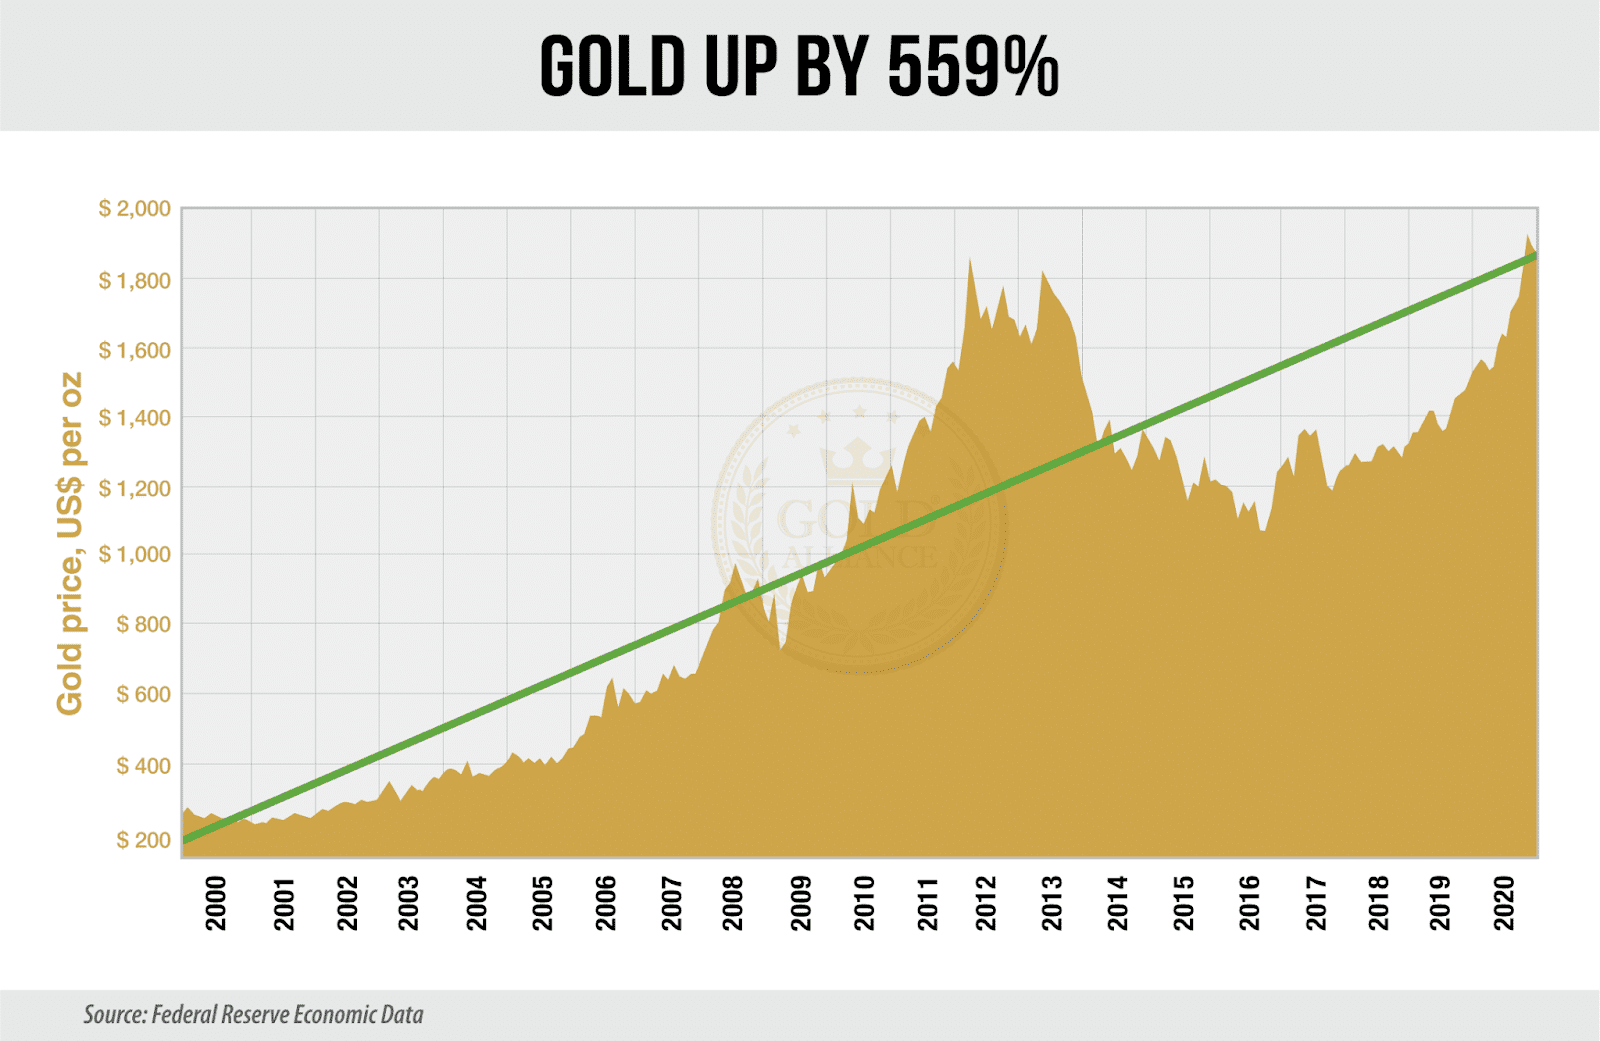 Gold has its ups and downs, but the long-term trend is showing great increases in the gold price.